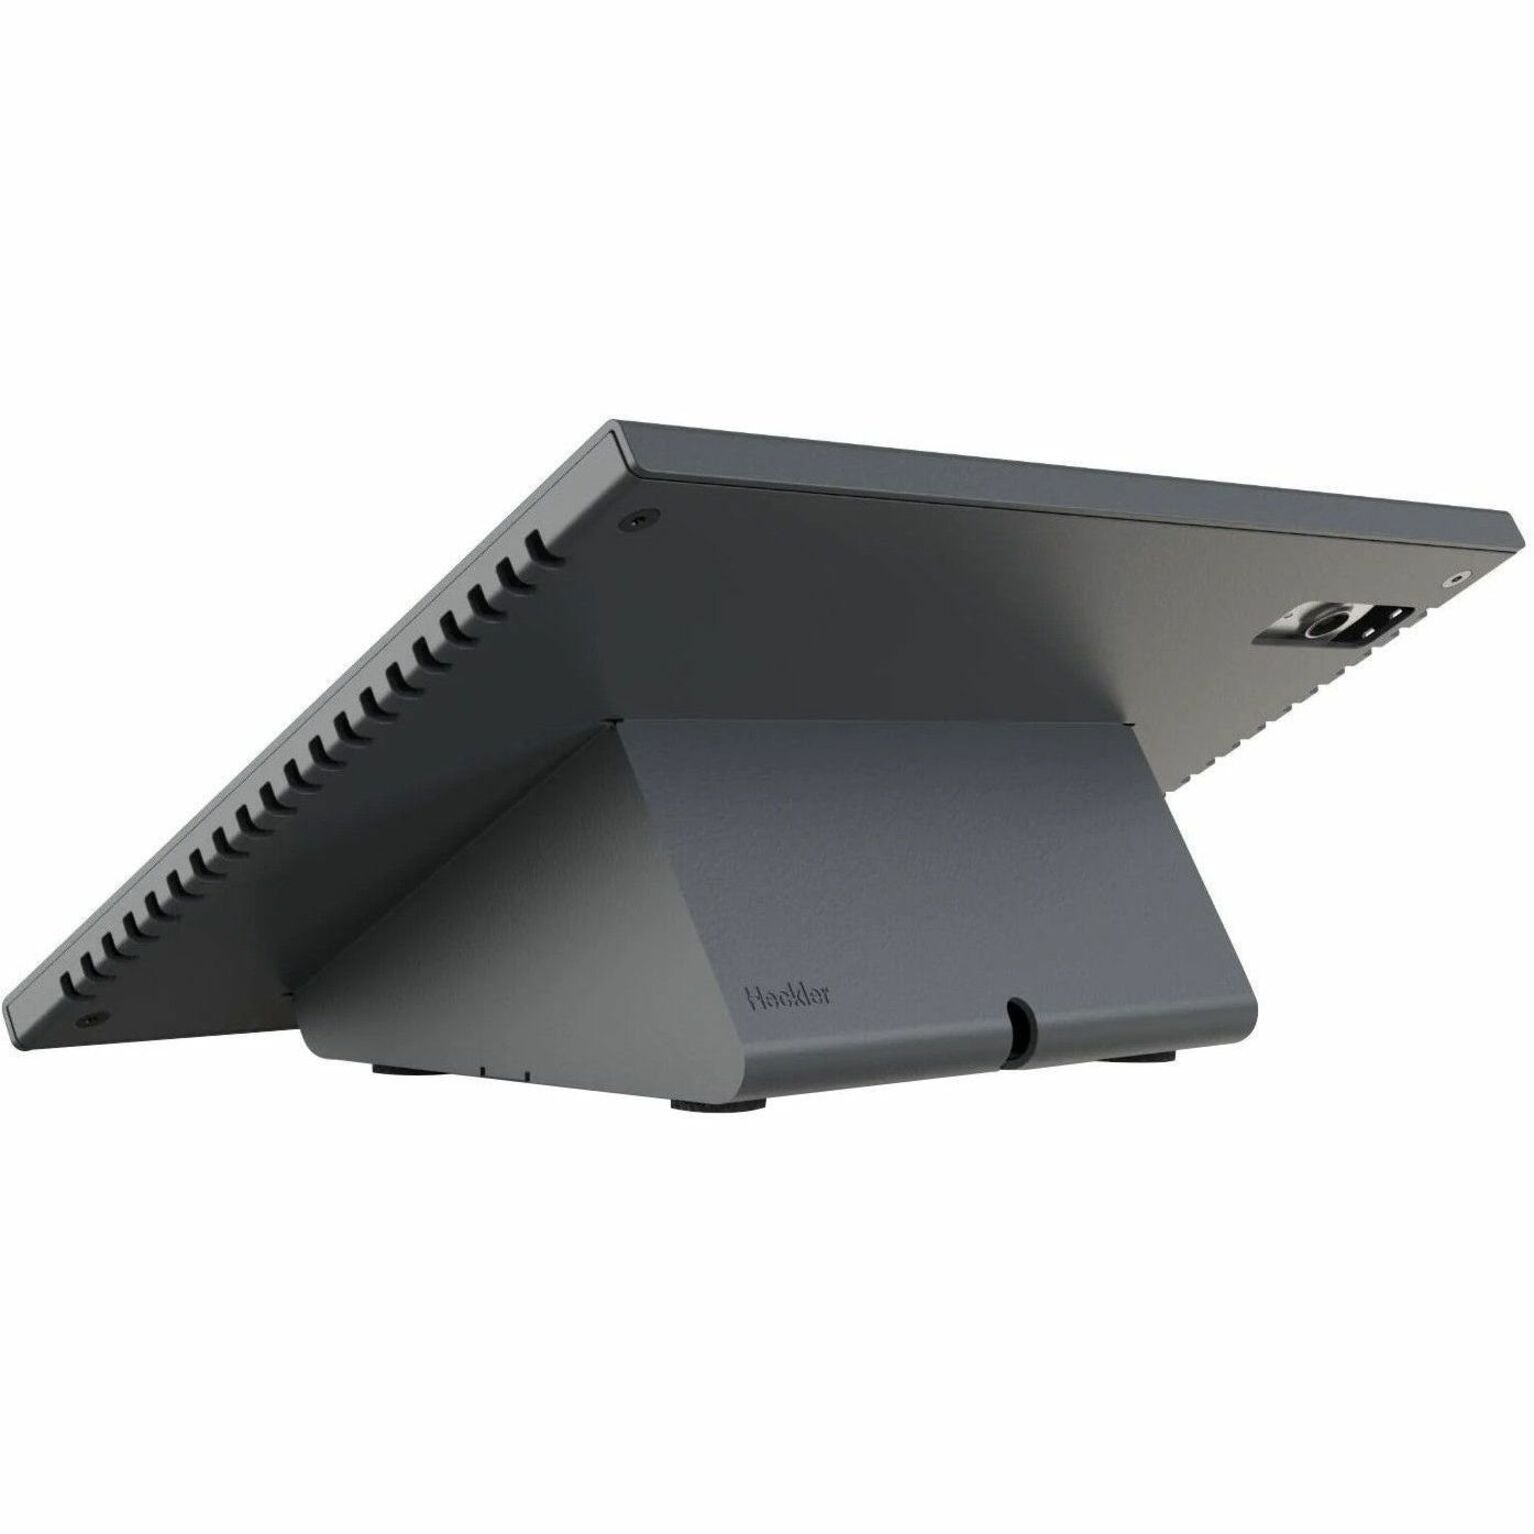 Heckler Design H751-BG Zoom Rooms Console for iPad 10th Generation, Scratch Resistant, Fingerprint Resistant, Theft Resistant, Durable, Tamper Resistant, Kensington Security Slot, Storage Compartment